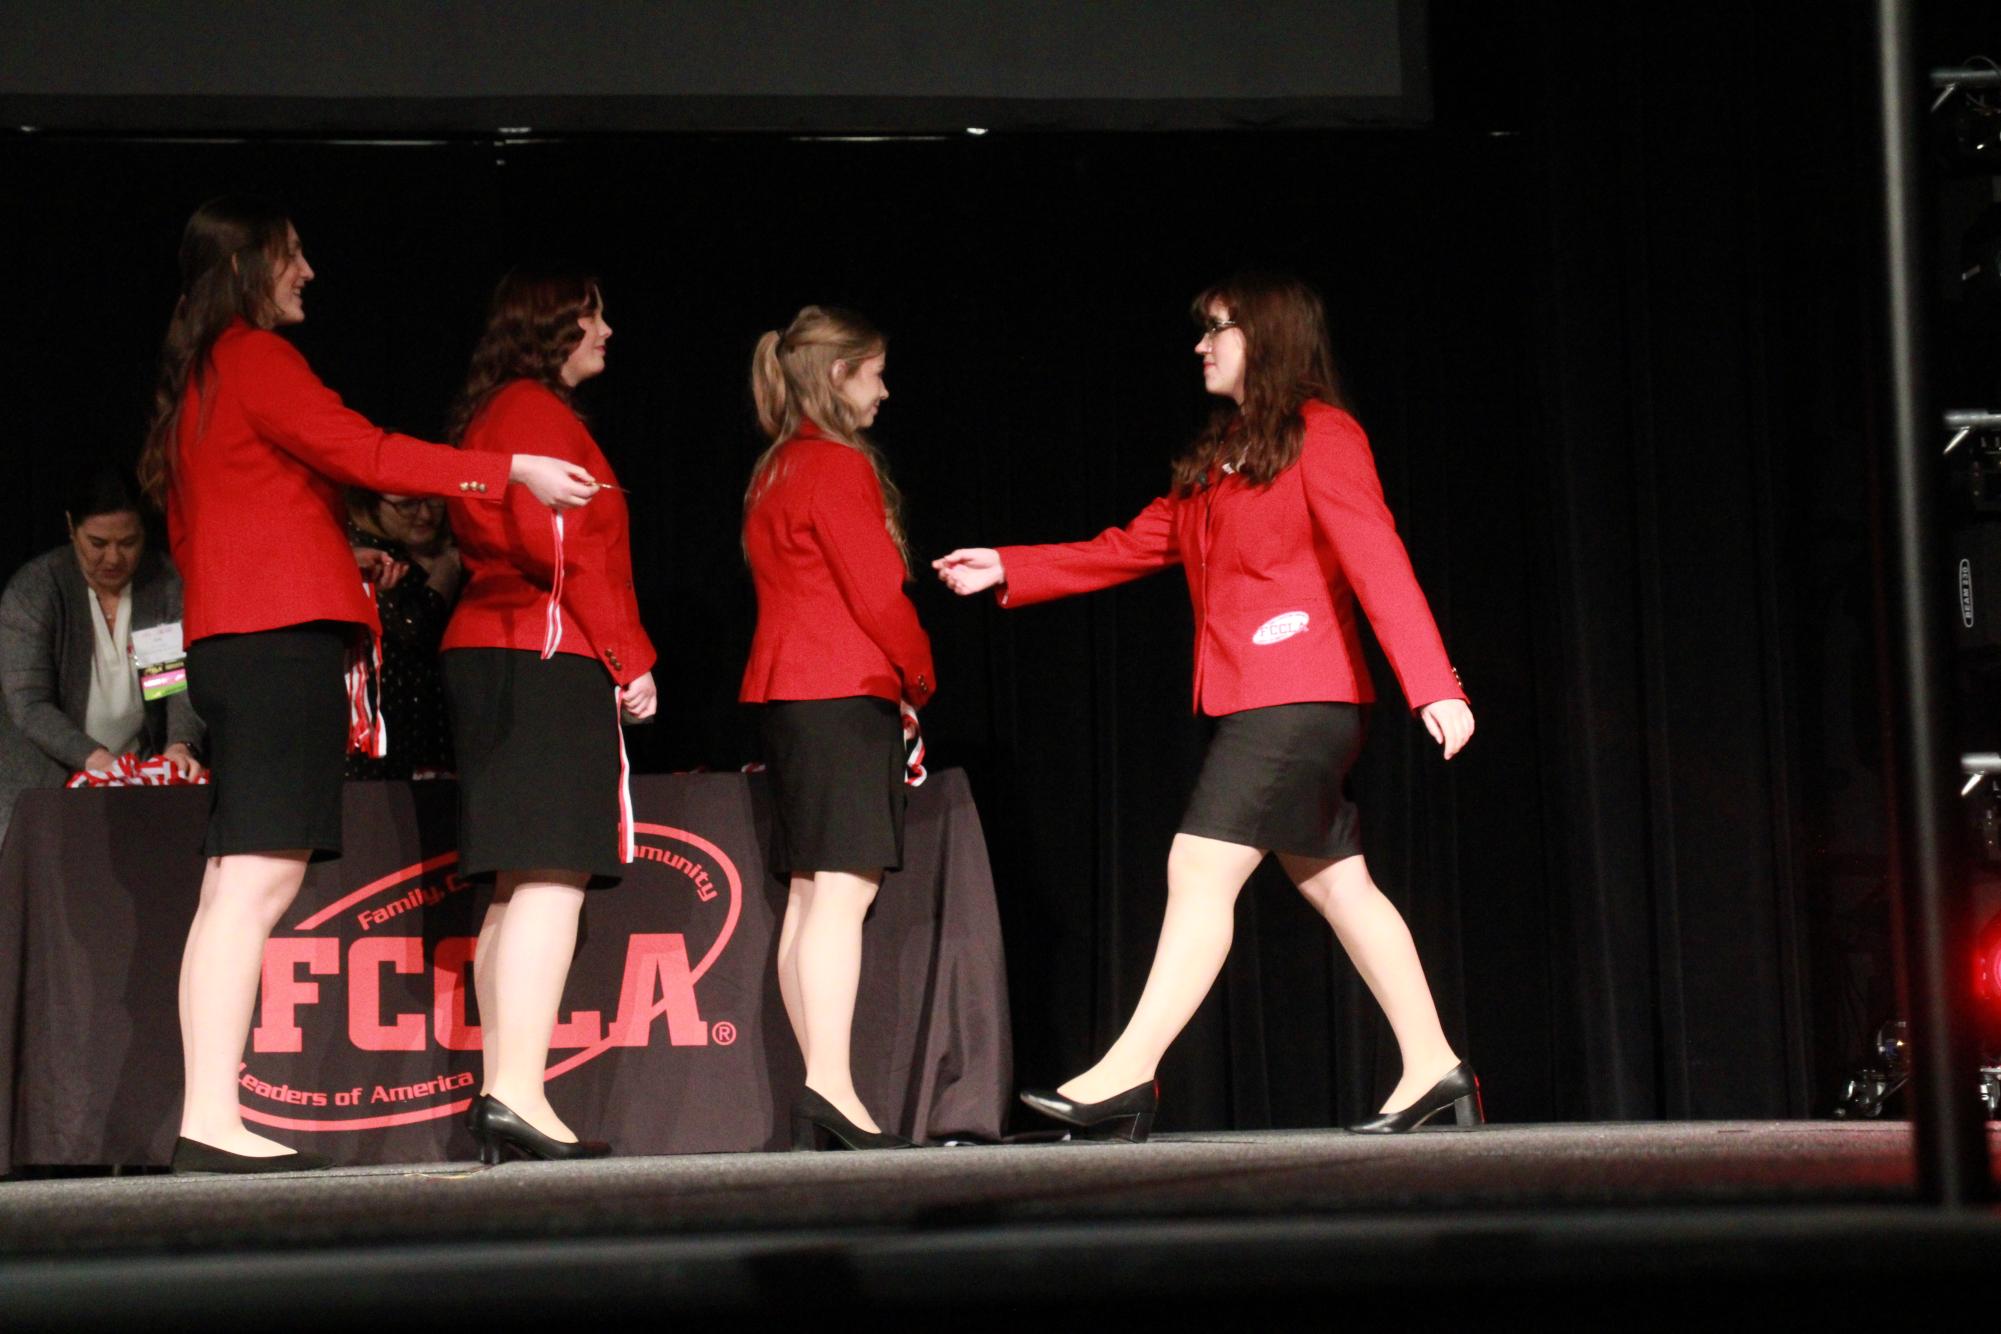 FCCLA+State+Leadership+Conference